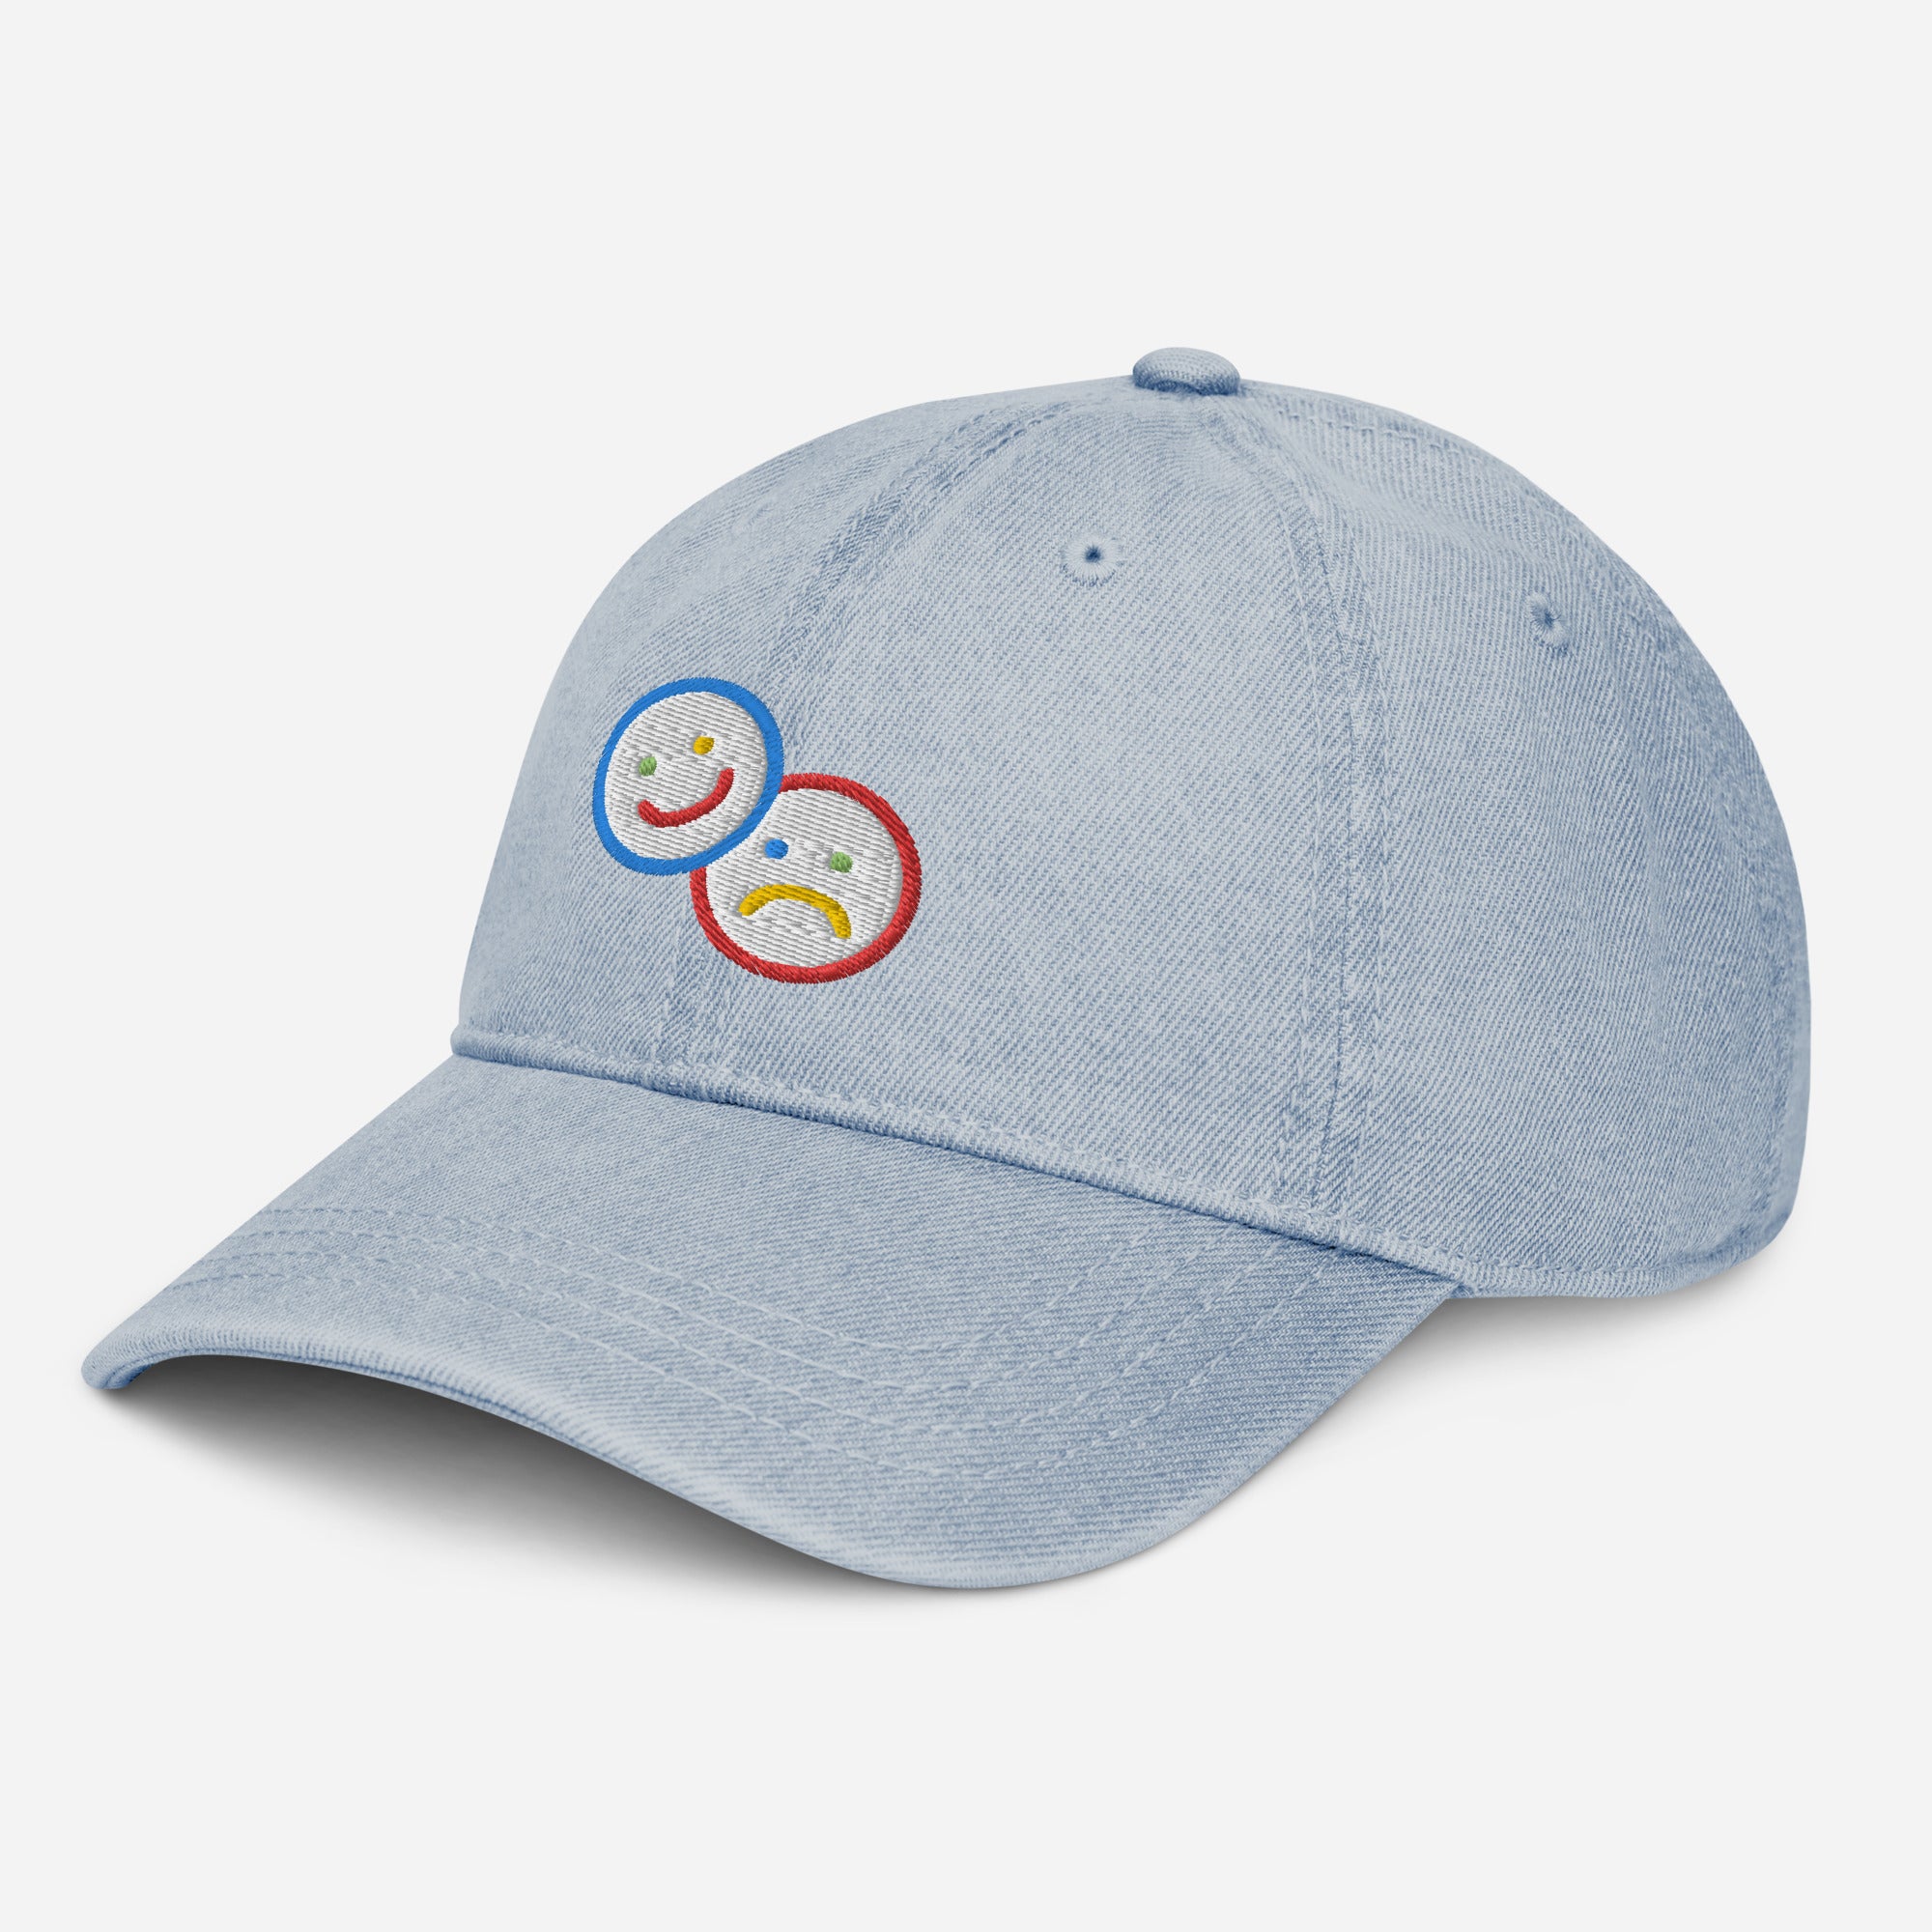 All Mixed Up Colorblock Smileys Embroidered Denim Hat